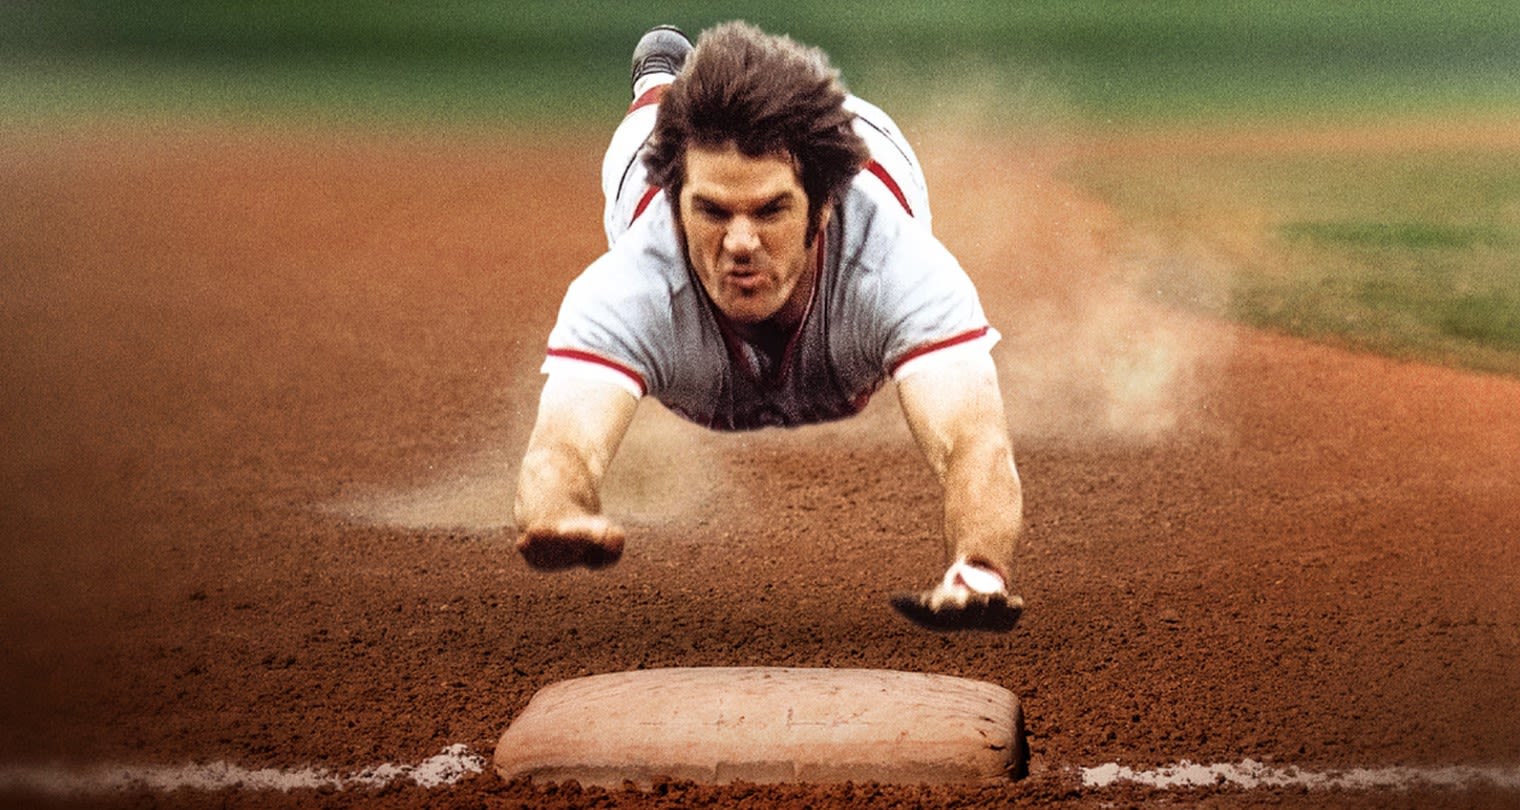 Documentary On Pete Rose Set To Be Released Later This Month On HBO - PWMania - Wrestling News